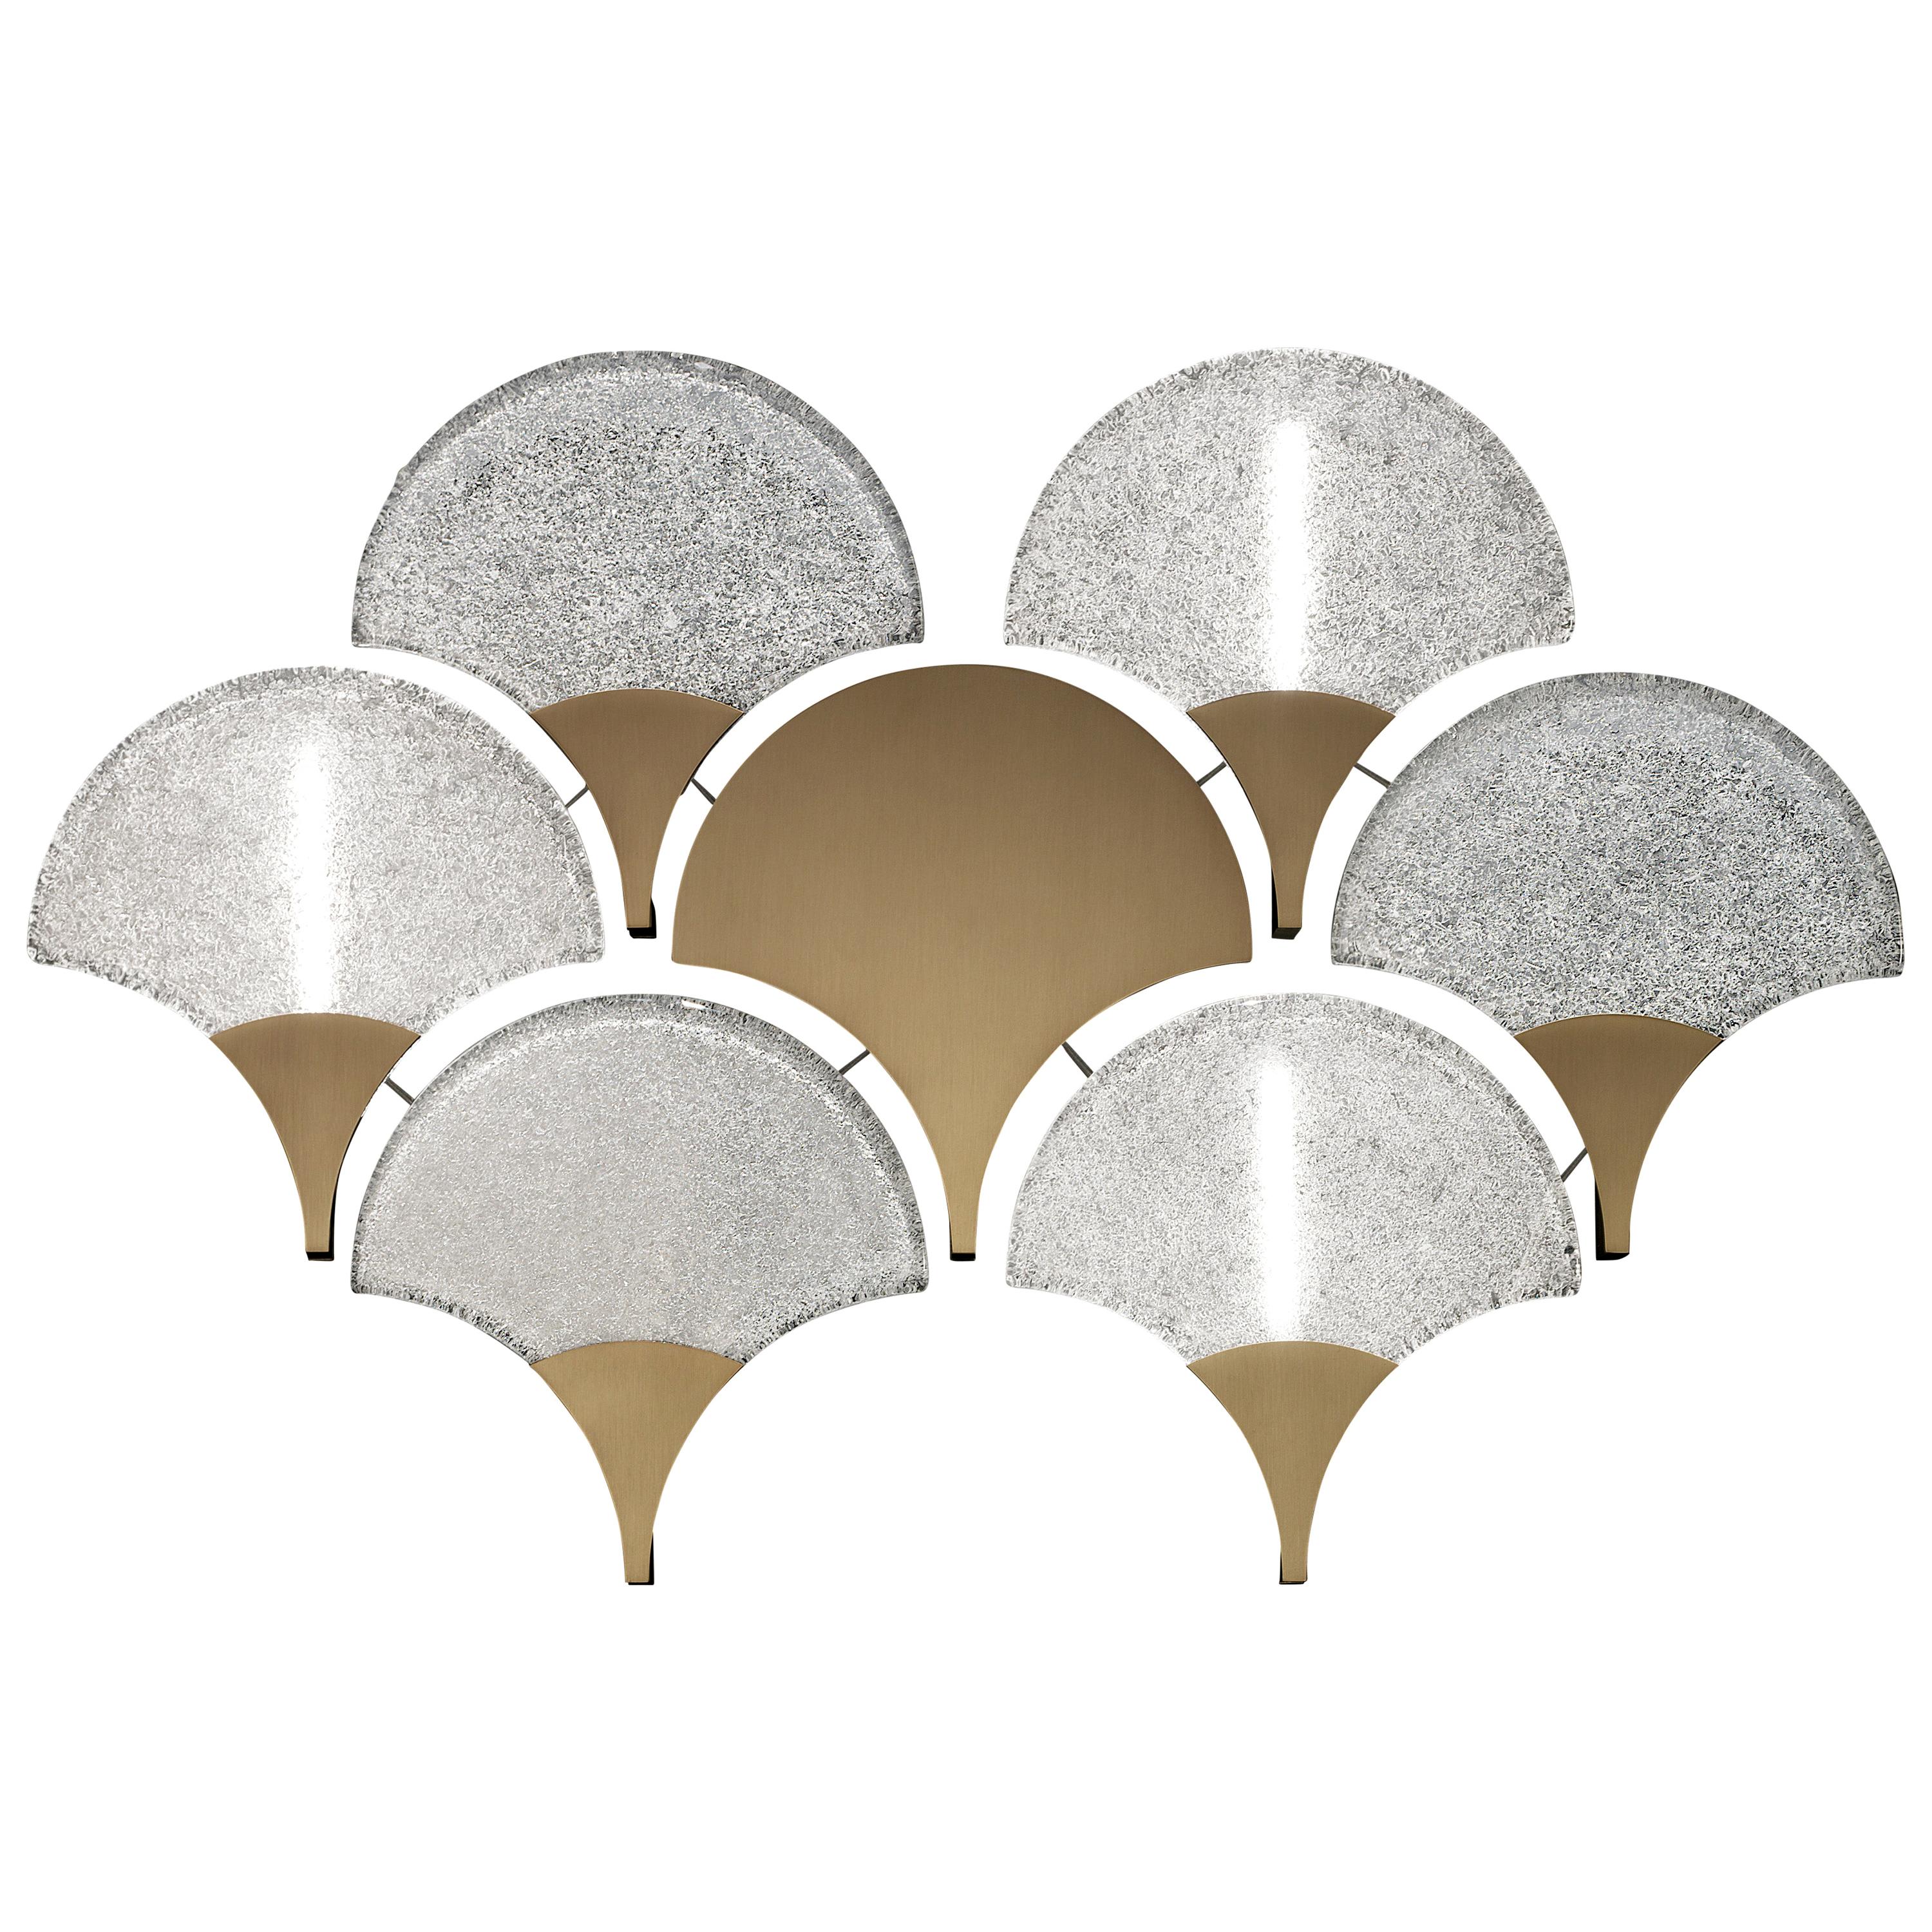 Tuileries 7374 Wall Sconce in Glass with Honey Bronze Finish, by Barovier&Toso